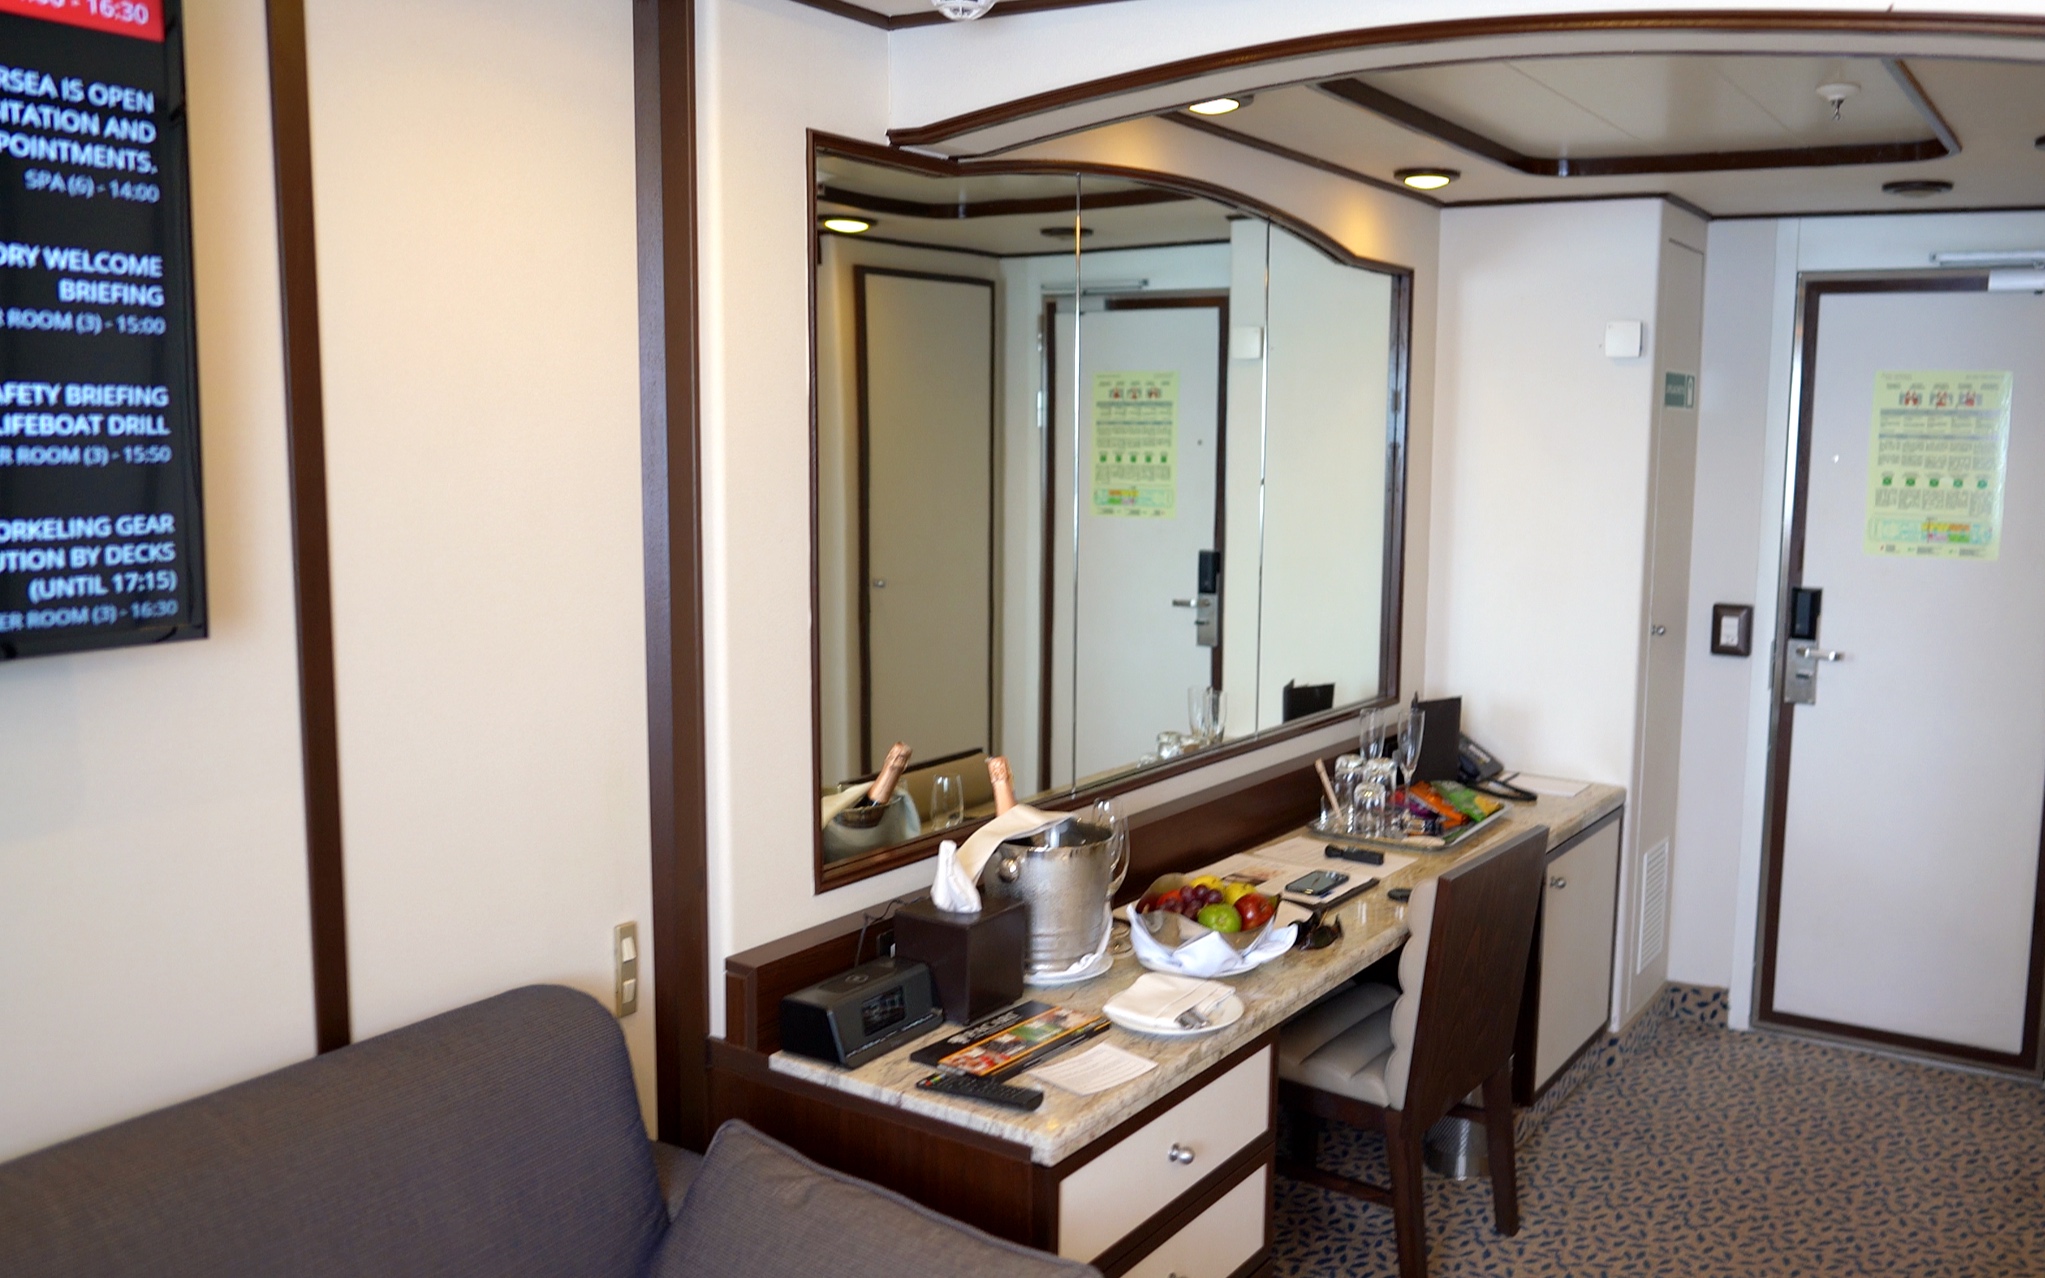  The vanity desk in our suite.  